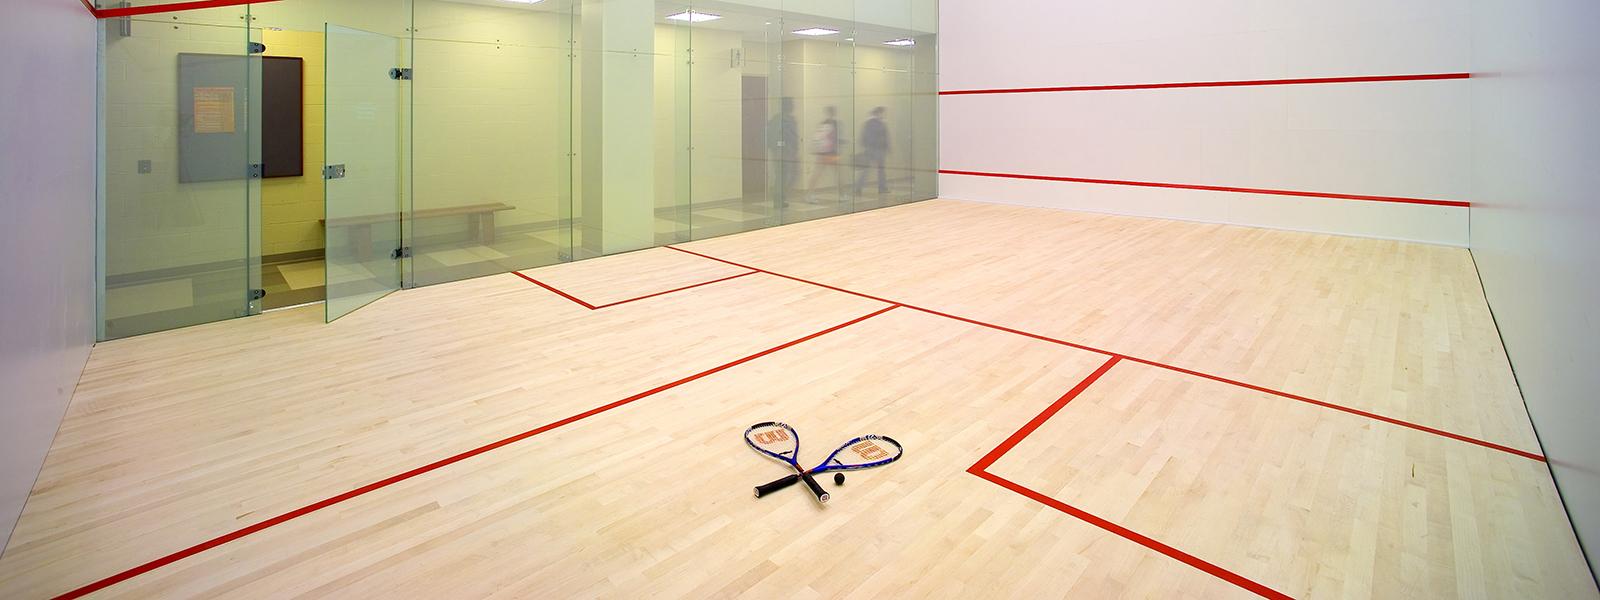 Photo of a squash court in the gym, with a ball and two rackets on the ground. 